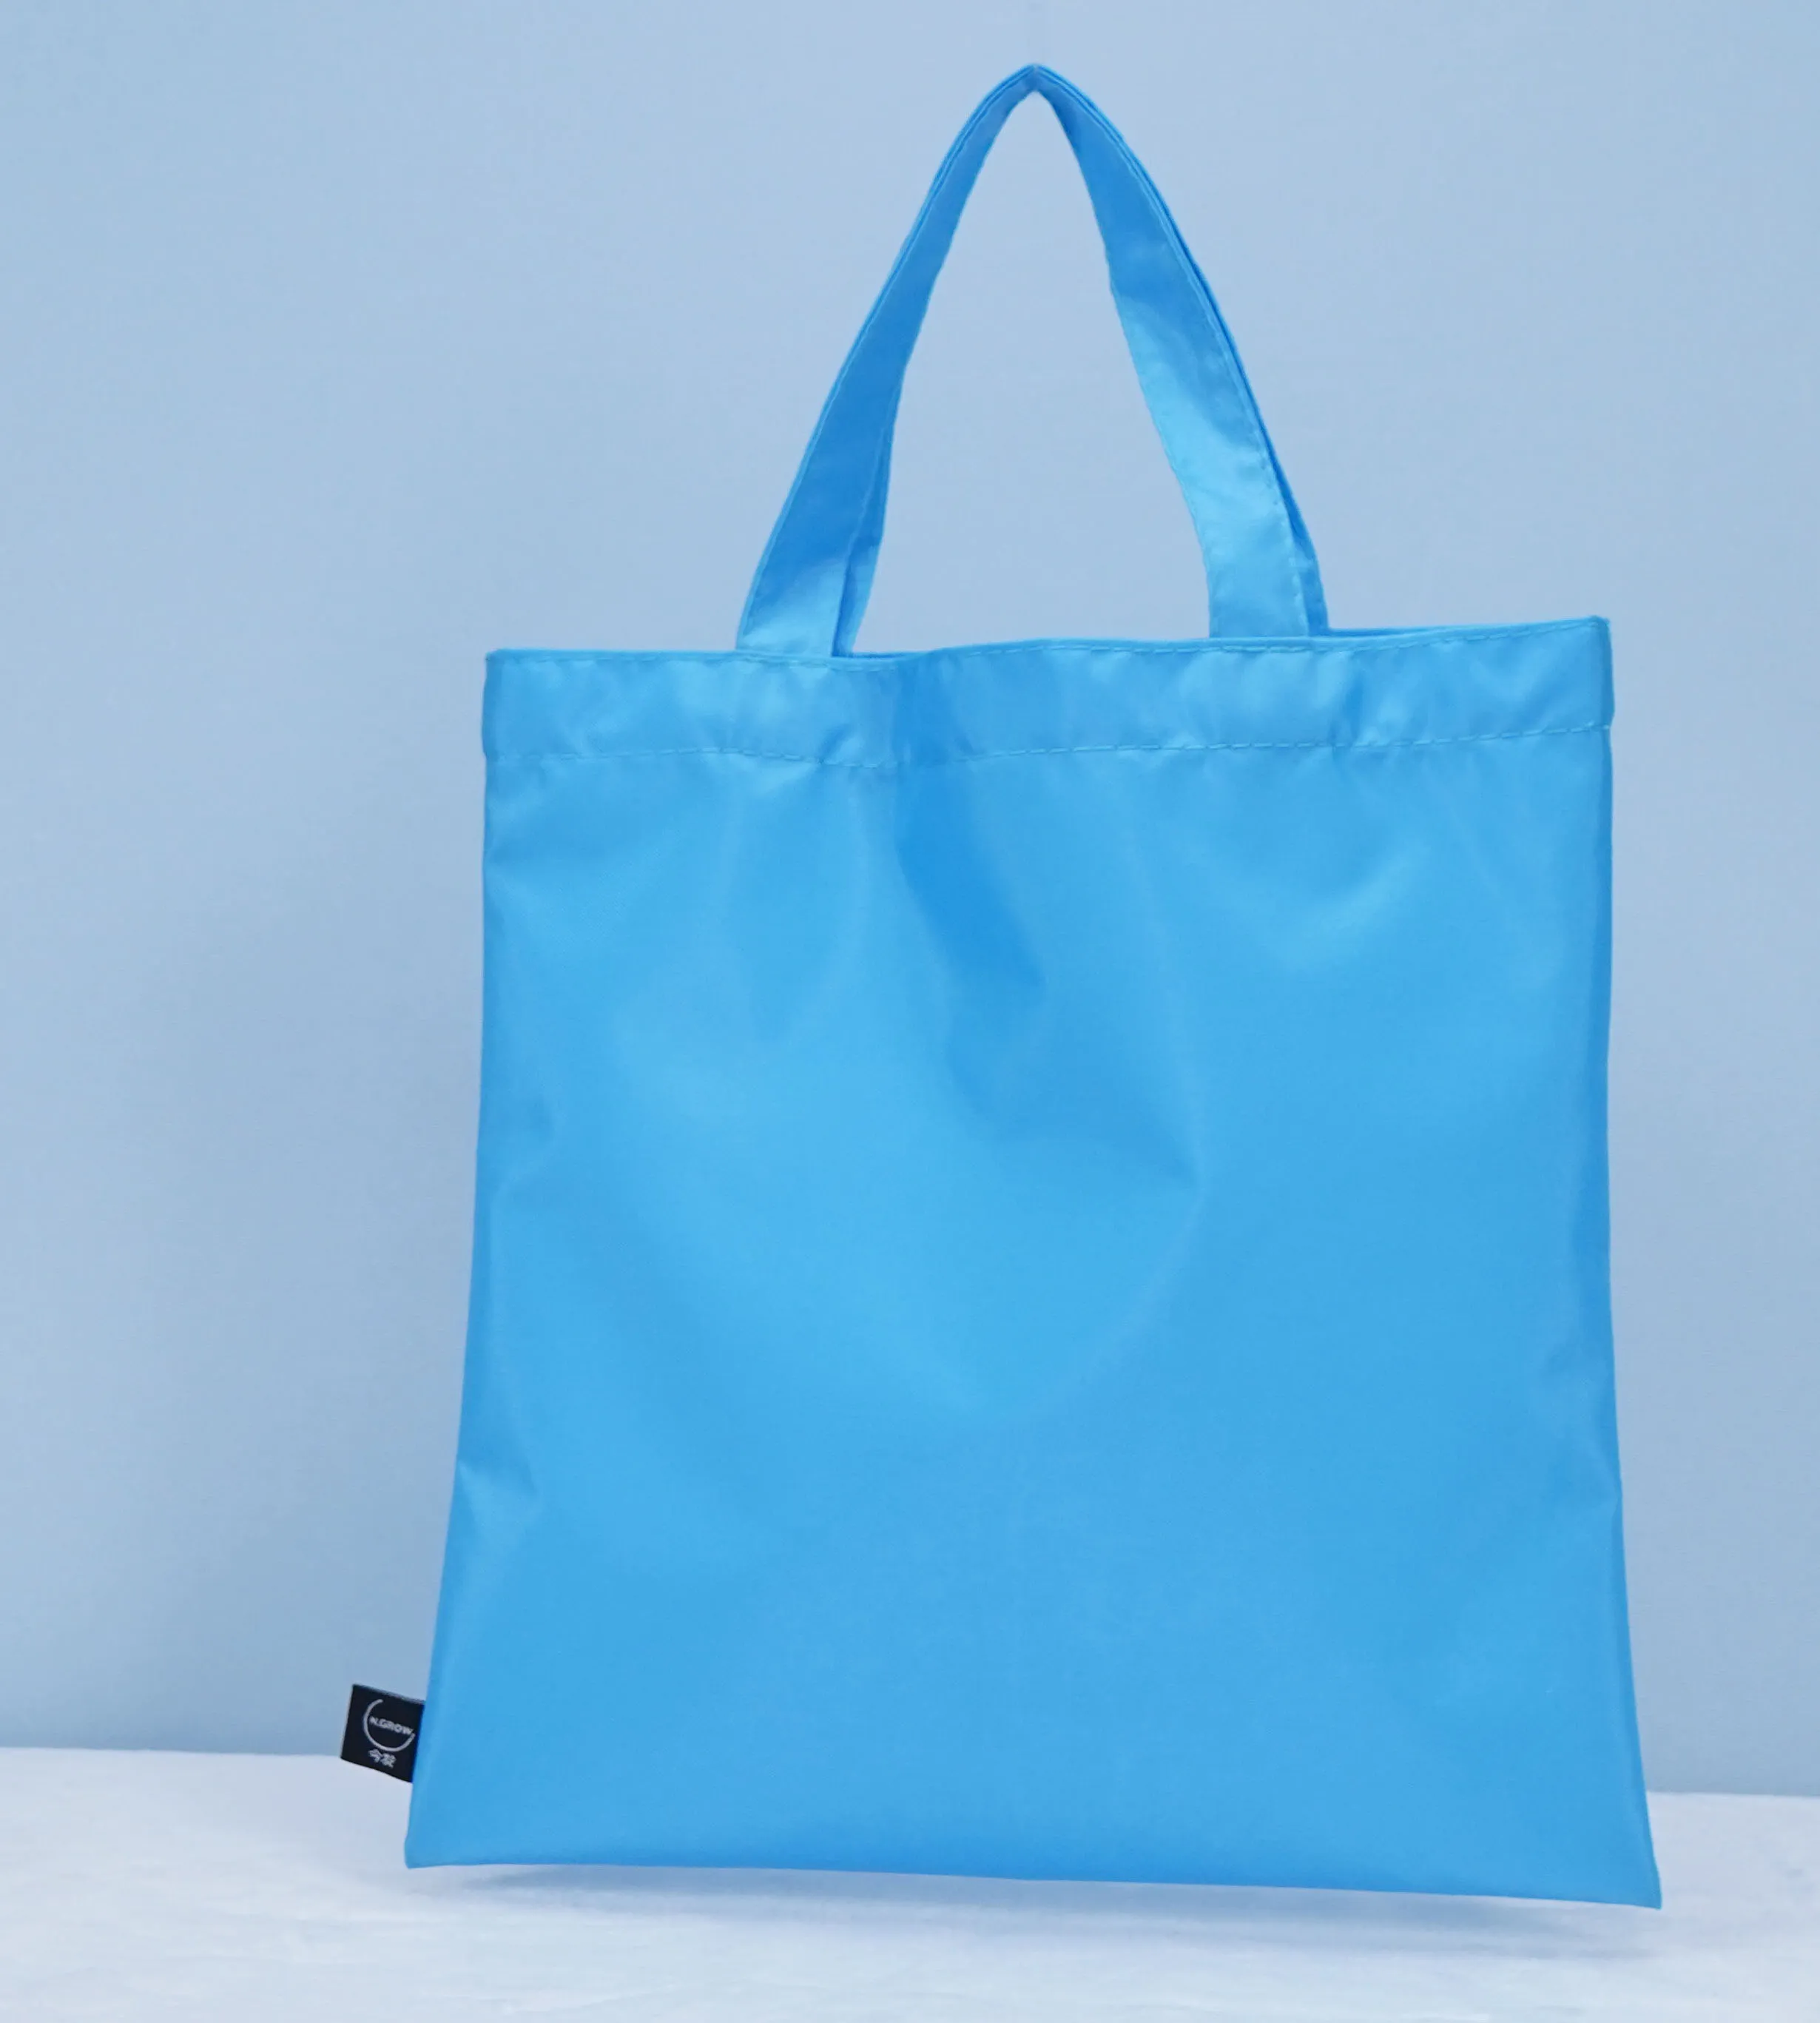 Versatile and Trendy: Make a Statement with a Customized Nylon Polyester Tote Bag